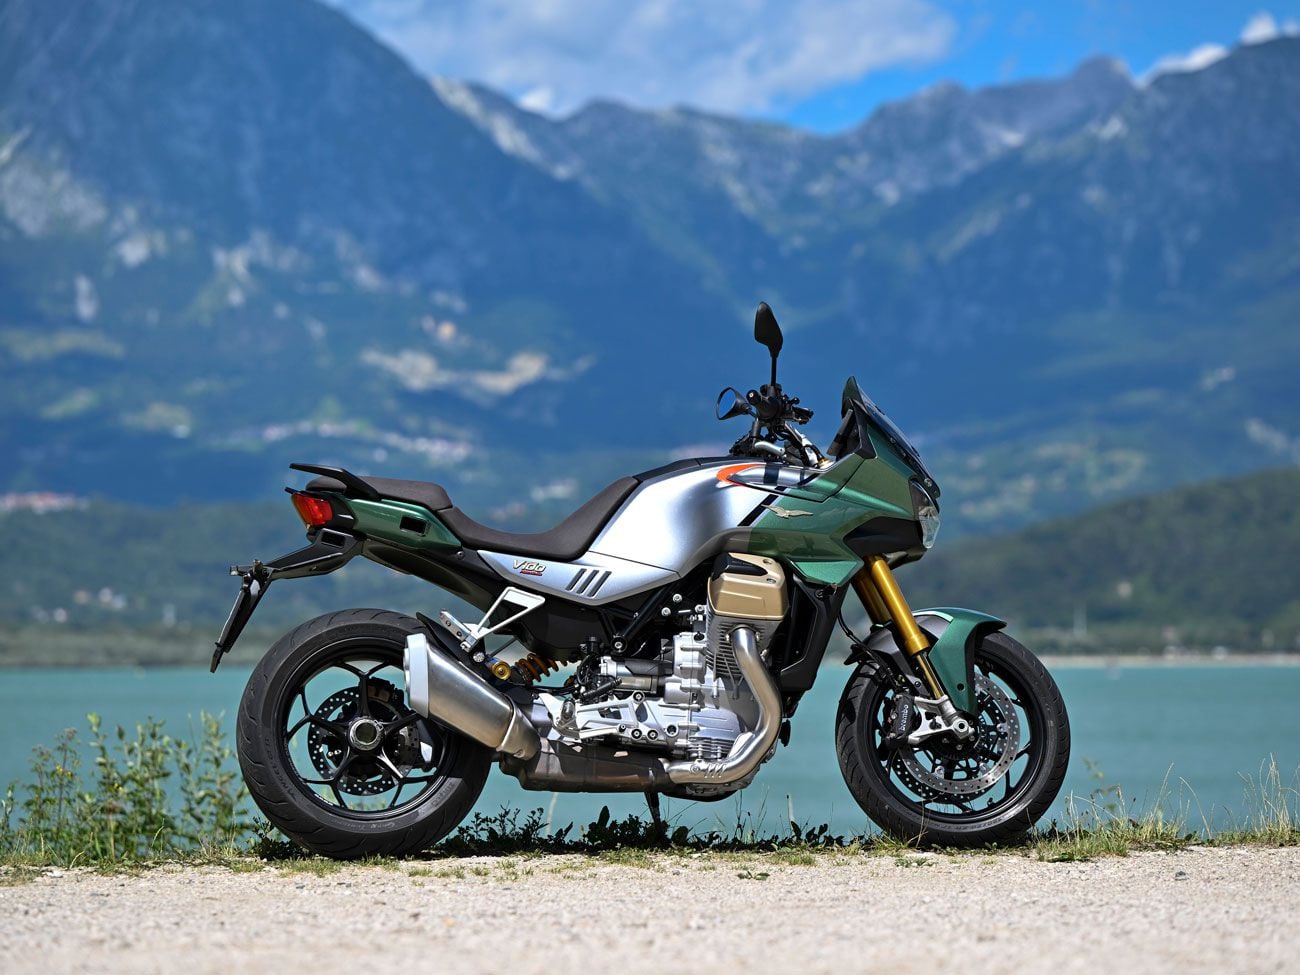 Moto Guzzi has been forced to step into the modern world with a brand-new liquid-cooled engine, primarily to be able to more easily meet strict new emissions rules like Euro 5.